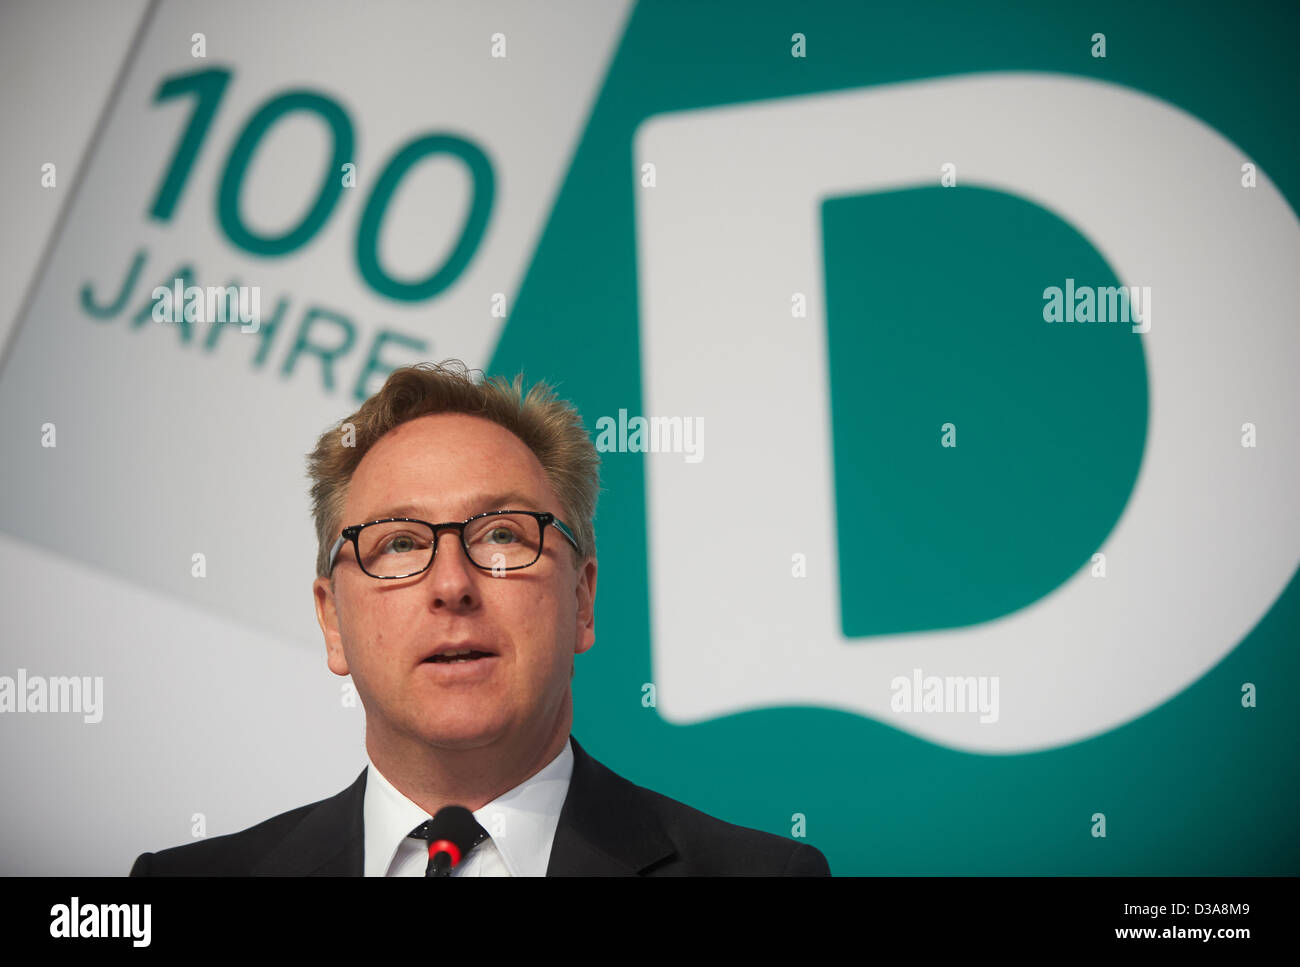 Chairman of the Administrative Board at Deichmann SE, Heinrich Deichmann, speaks during press conference on the 100th anniversary of the shoe fashion chain in Esssen, Germany, 14 February 2013. Photo: